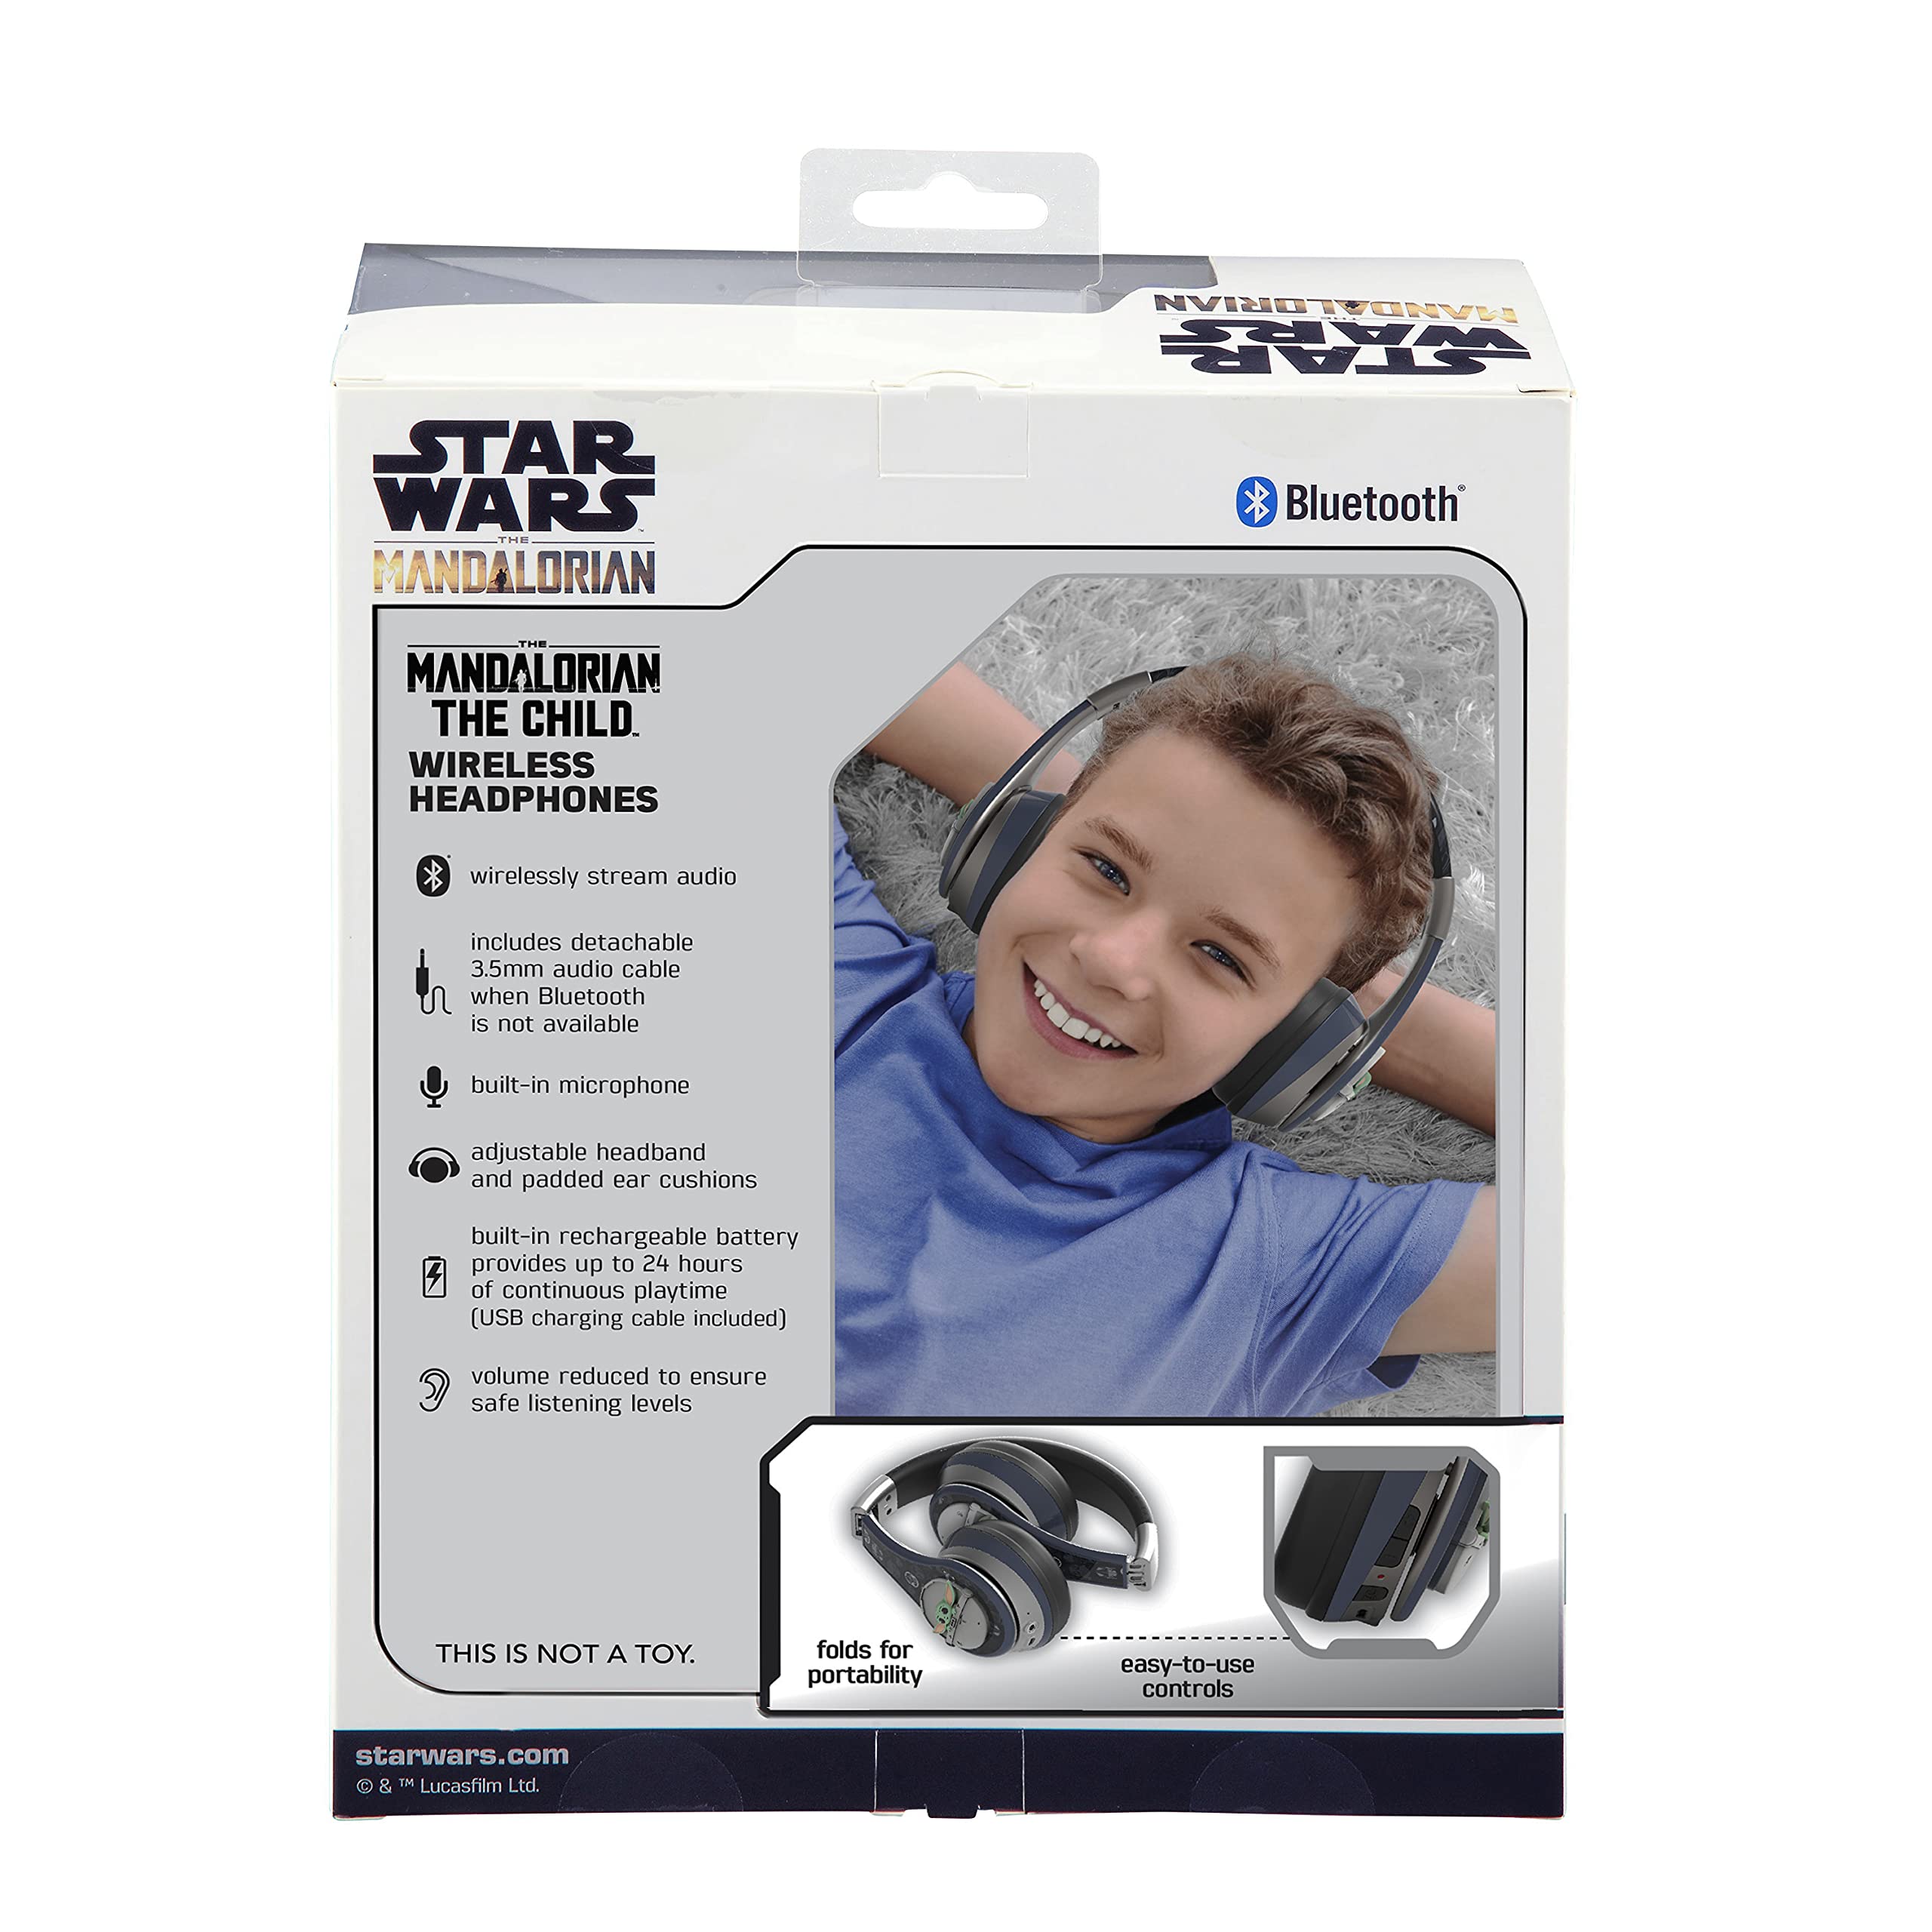 Star Wars The Child Kids Bluetooth Headphones, Wireless Headphones with Microphone Includes Aux Cord, Volume Reduced Kids Foldable Headphones for School, Home, or Travel